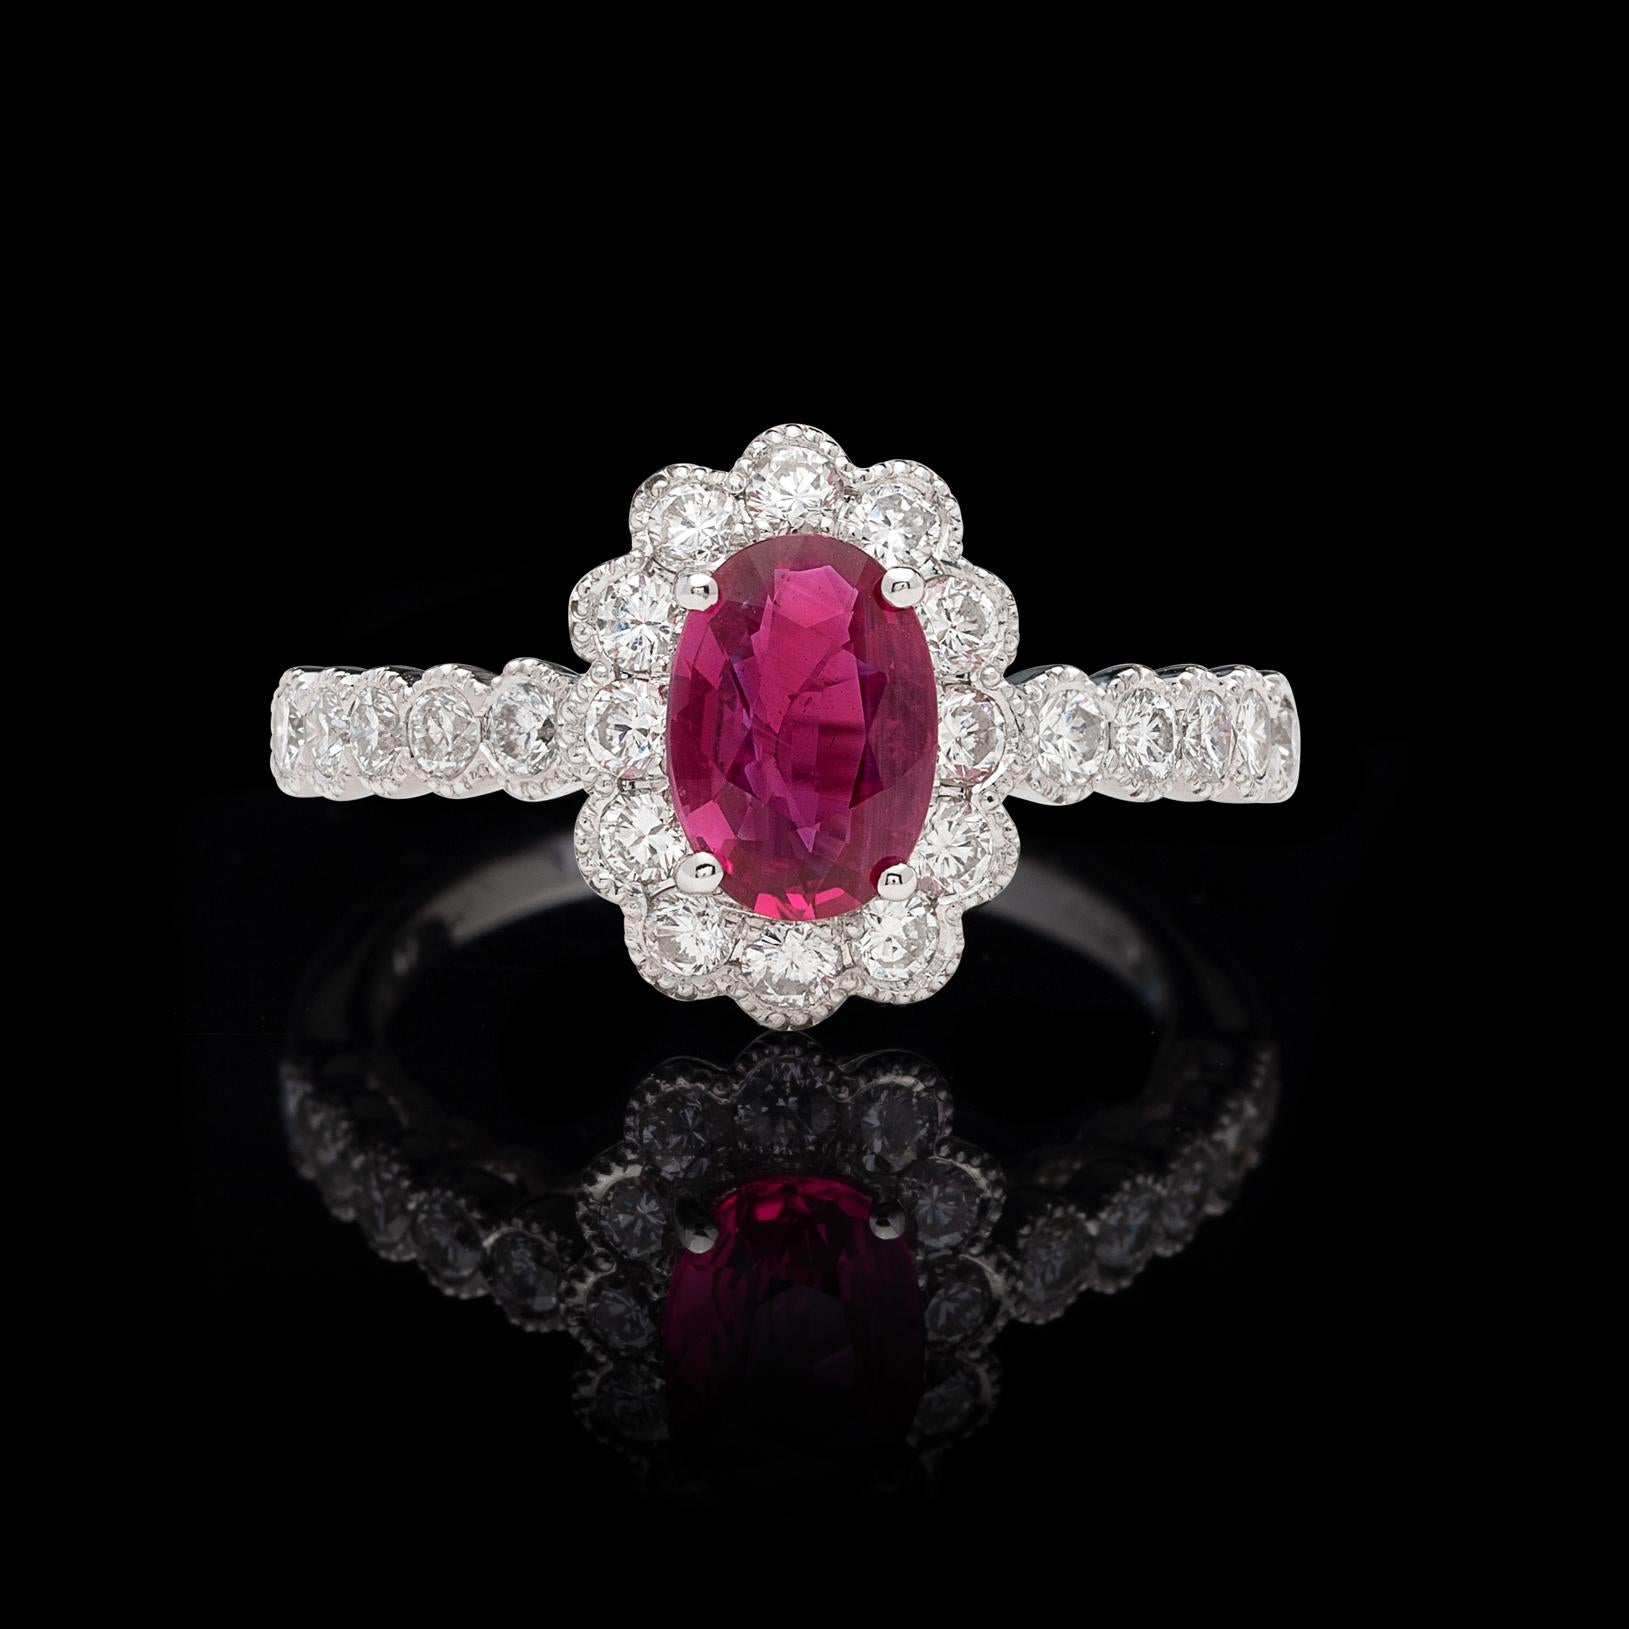 GIA 1.04 Carat Unheated Ruby Diamond Ring For Sale 2